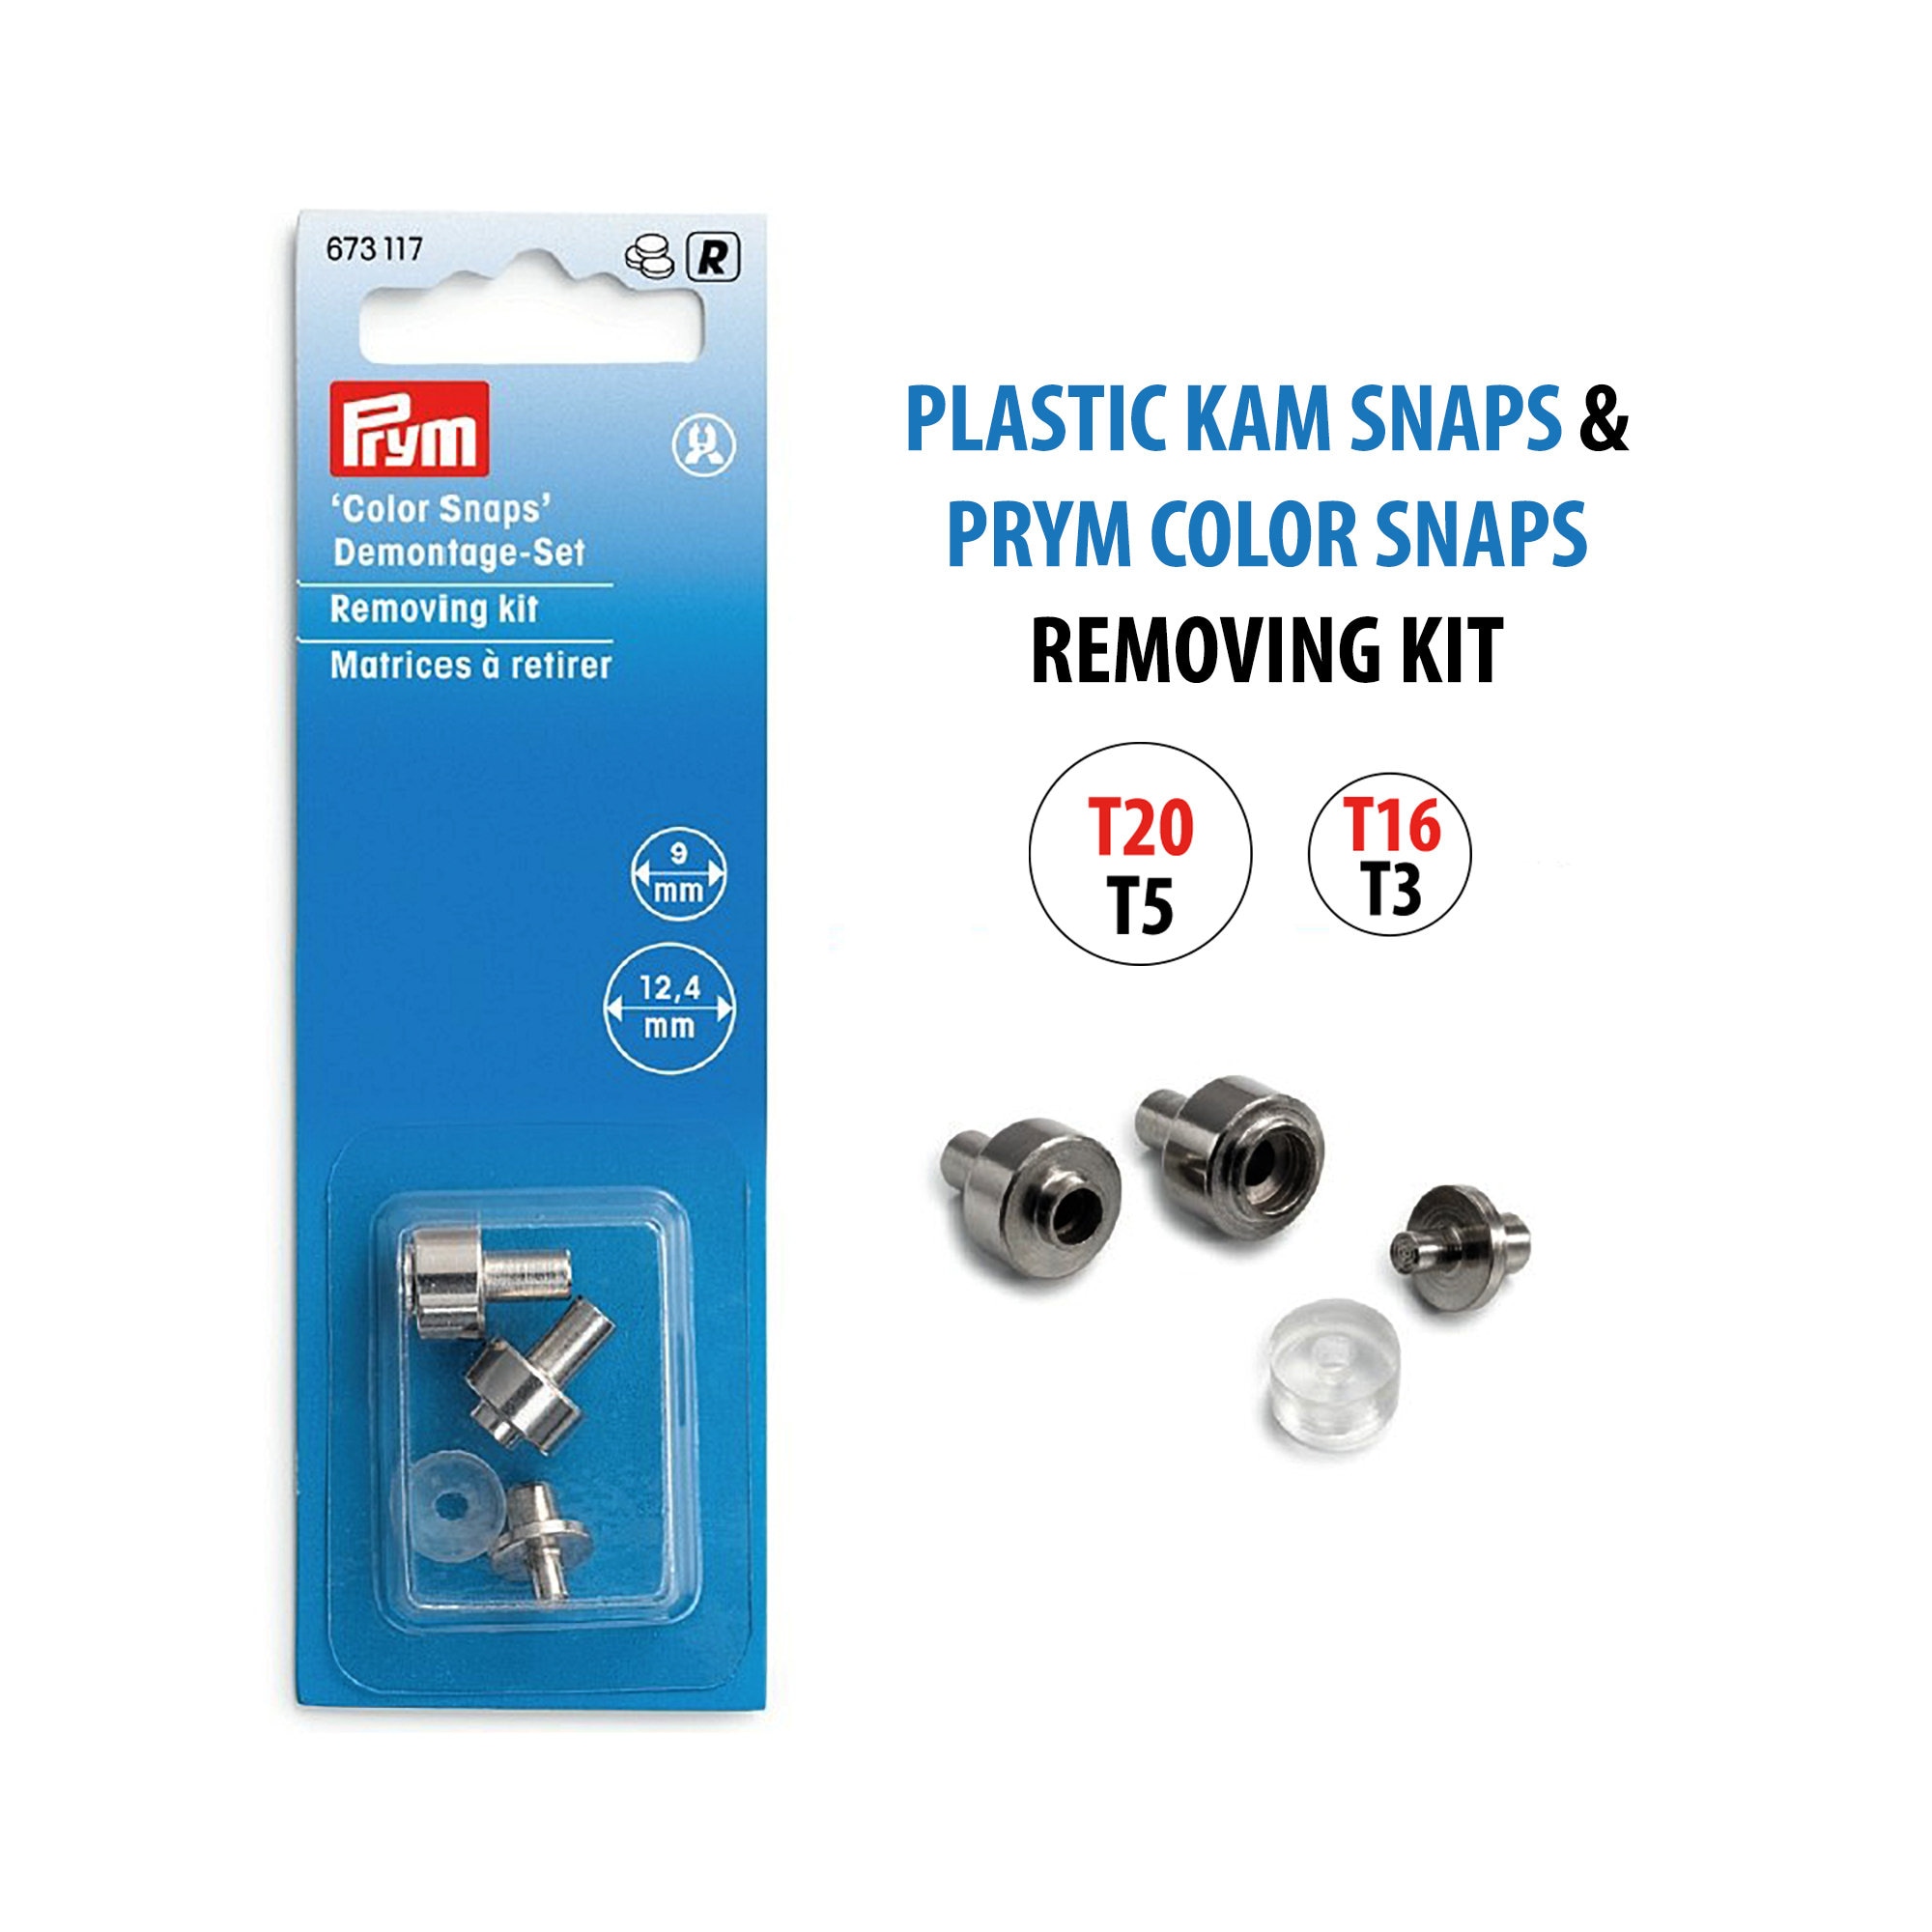 KAM Snaps Removal Tool for Prym VARIO Plier, Hand Press Die Set, Press  Fastener Tool, Snap Setter Removing Kit for Round Color Snaps 